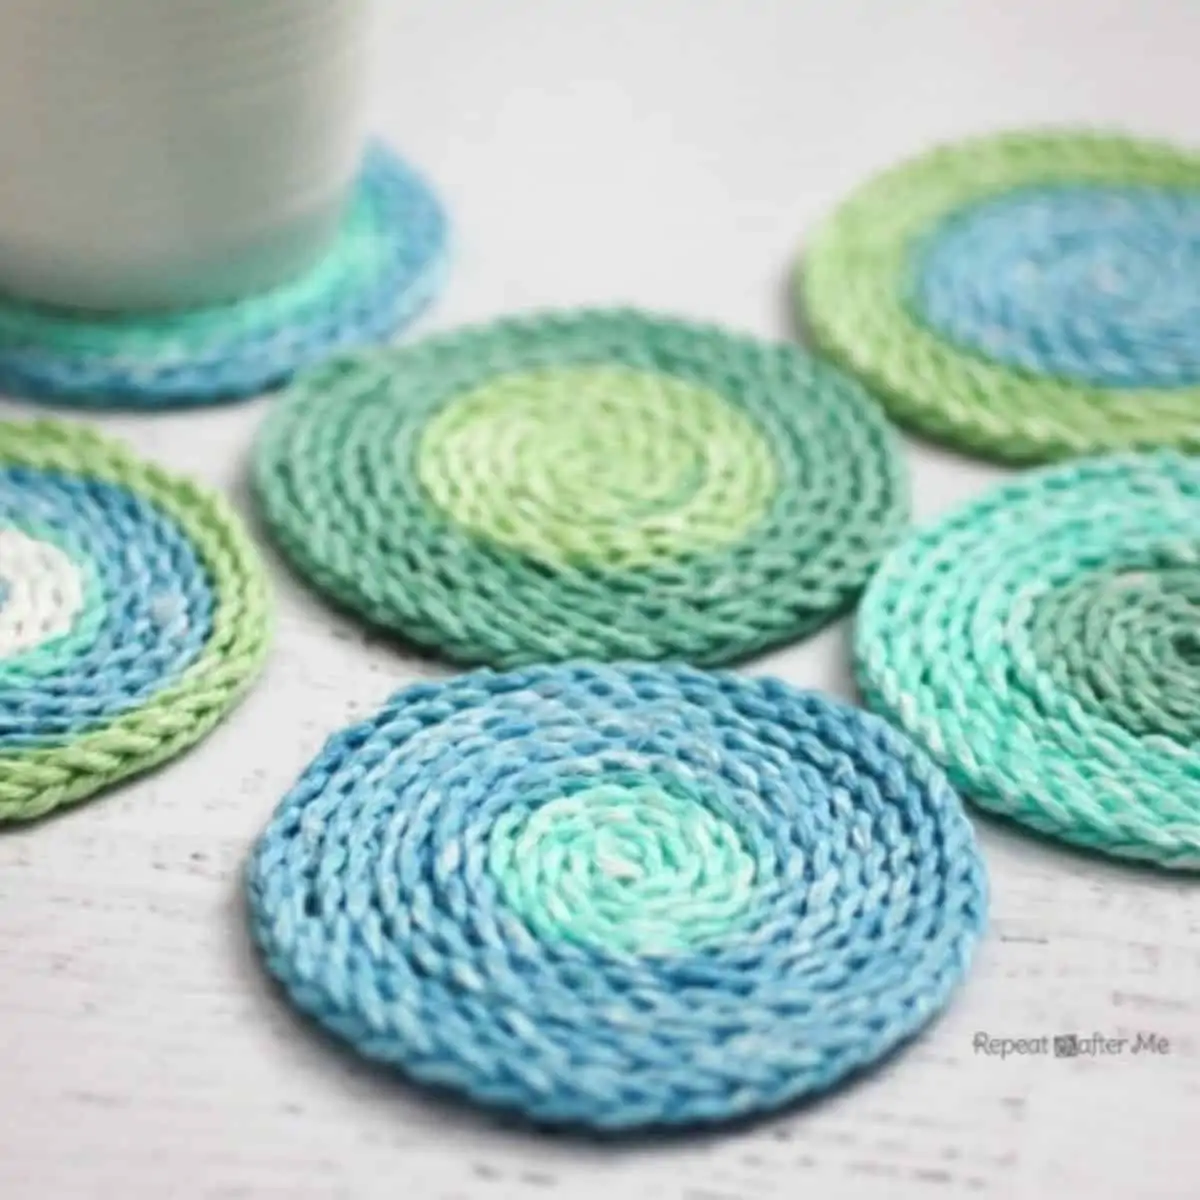 round coasters made with variegated blue green yarn